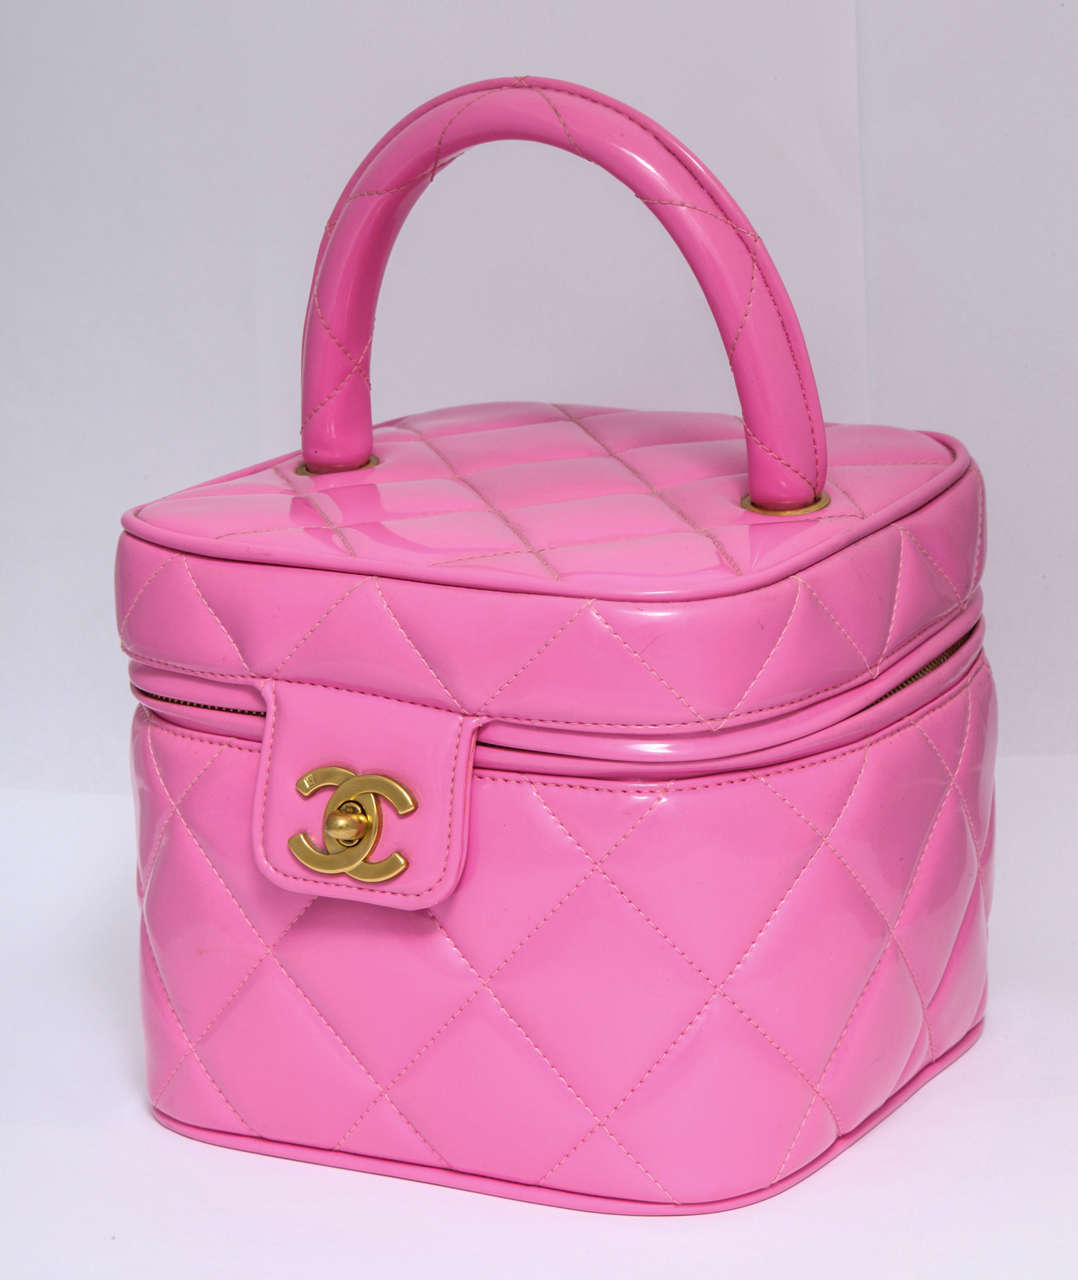 Very rare pink Chanel quilted vanity case bag with a heart shaped mirror and large CC logos.